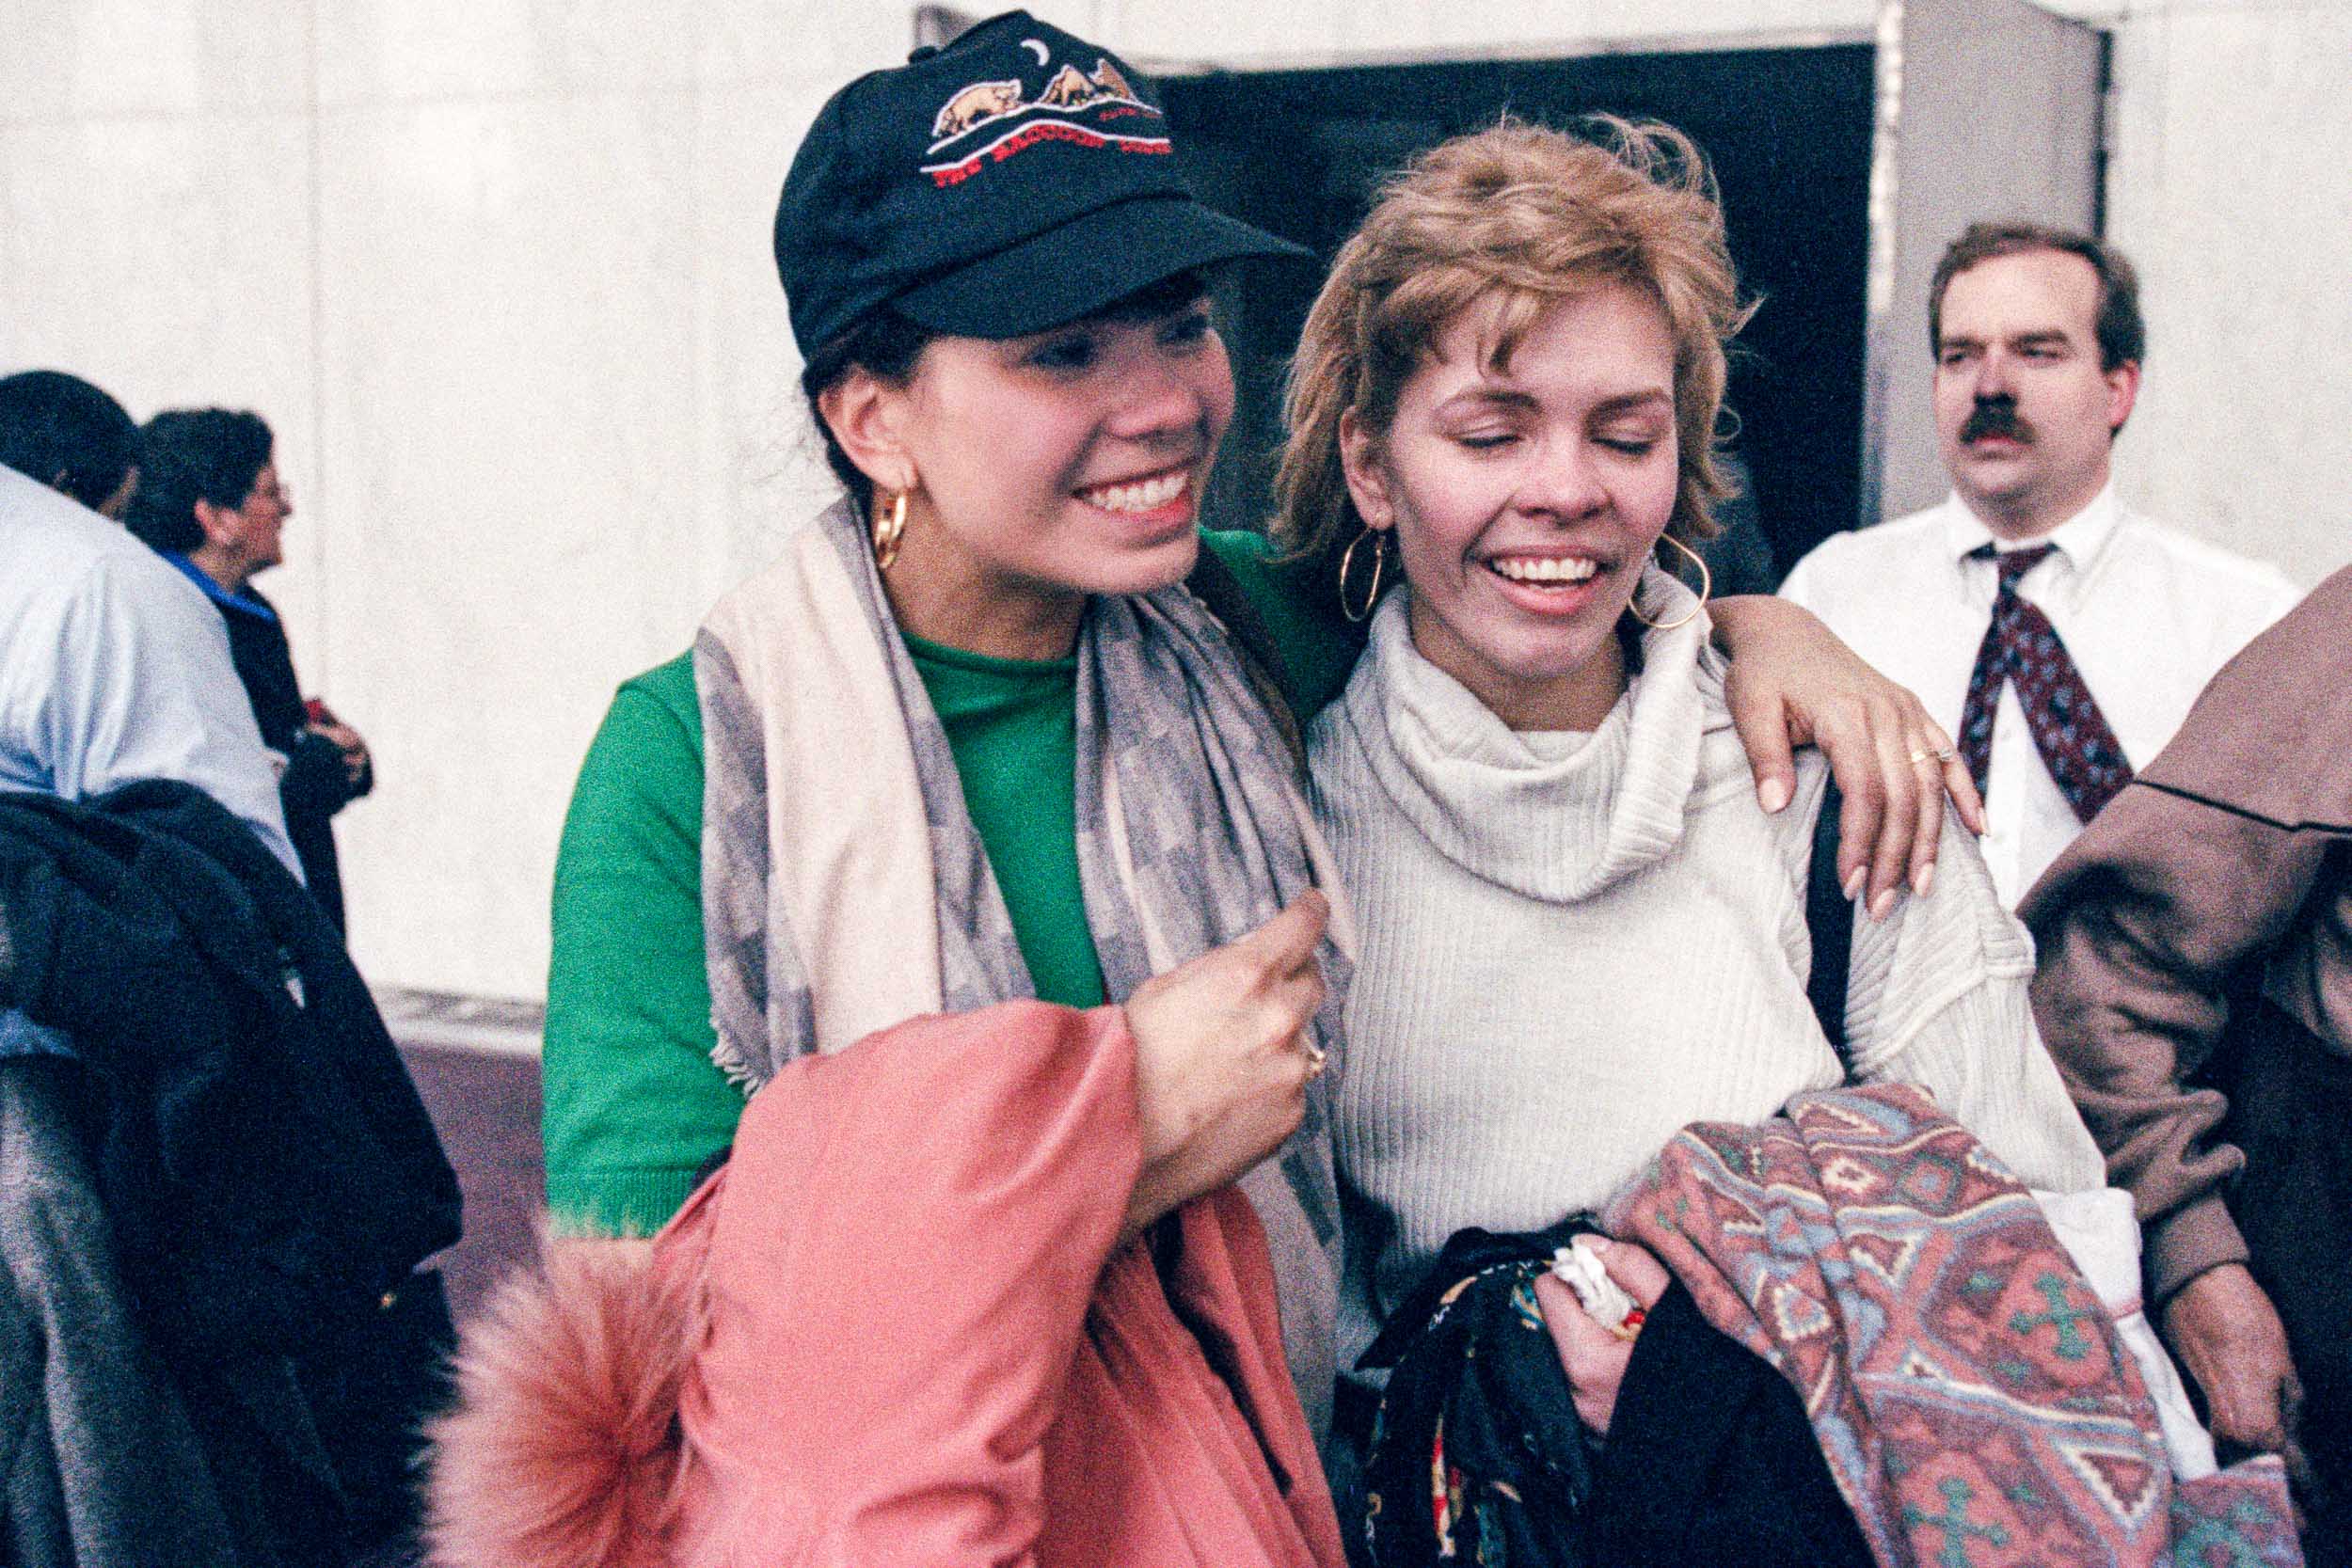 Office workers reuniting with joy  in the lobby of the World Trade Center, NY, 1993